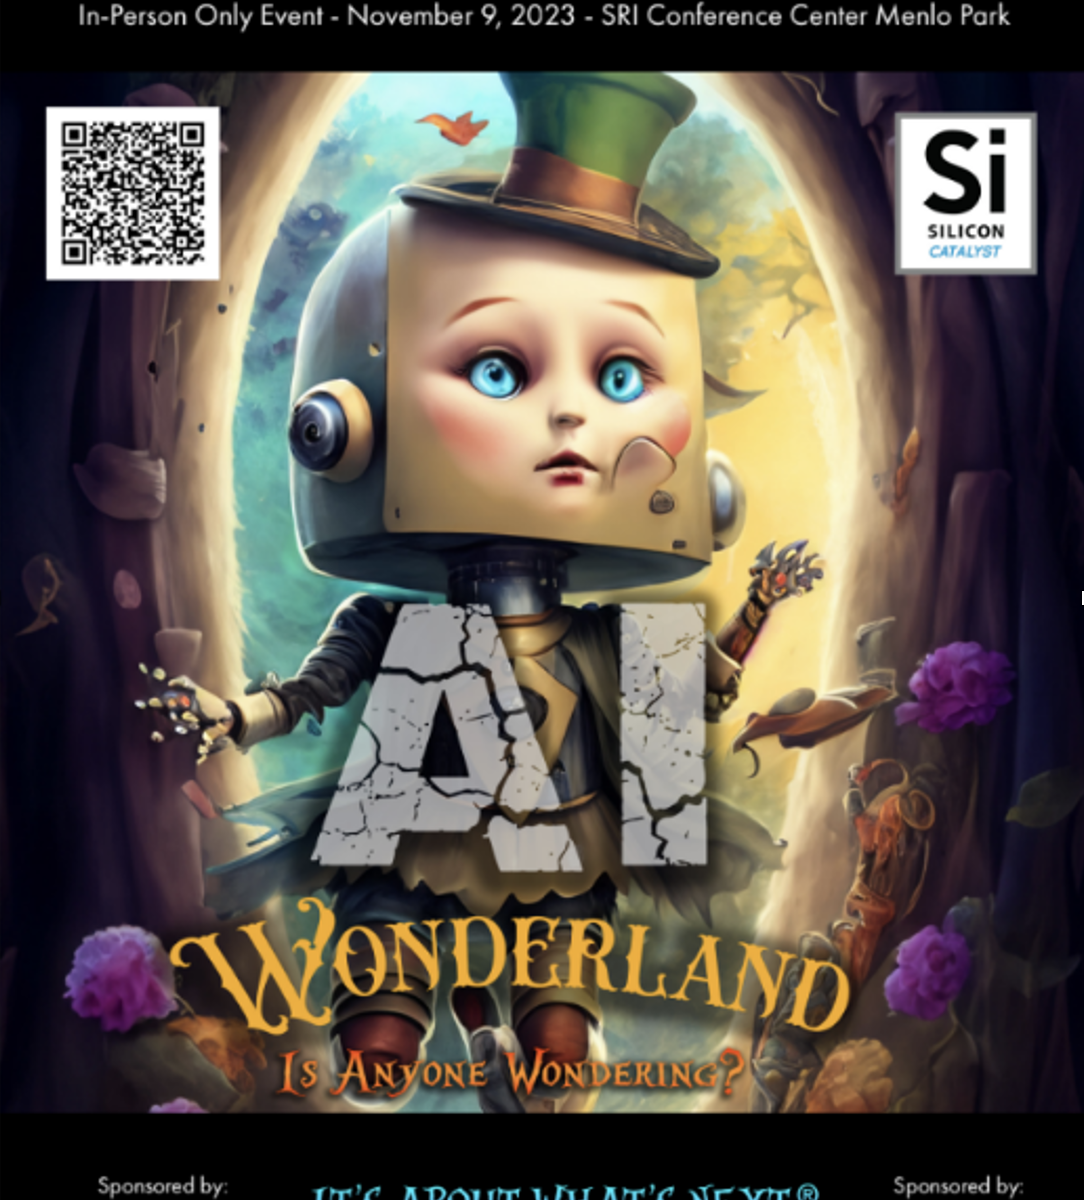 Silicon Catalyst Welcomes You to Our “AI Wonderland”